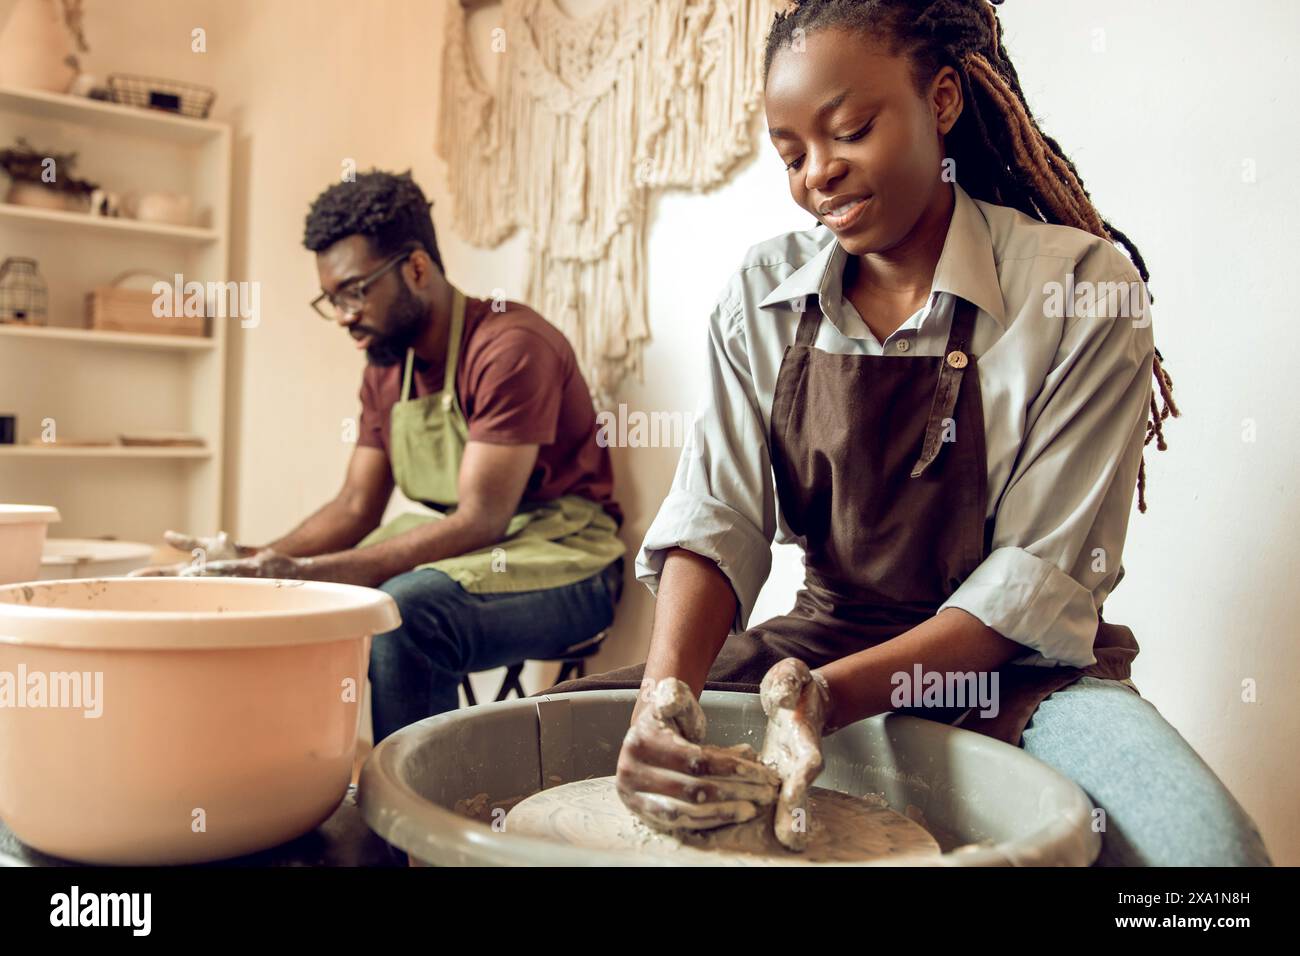 Pottery. Man and woman having a pottery workshop and looking involved Stock Photo